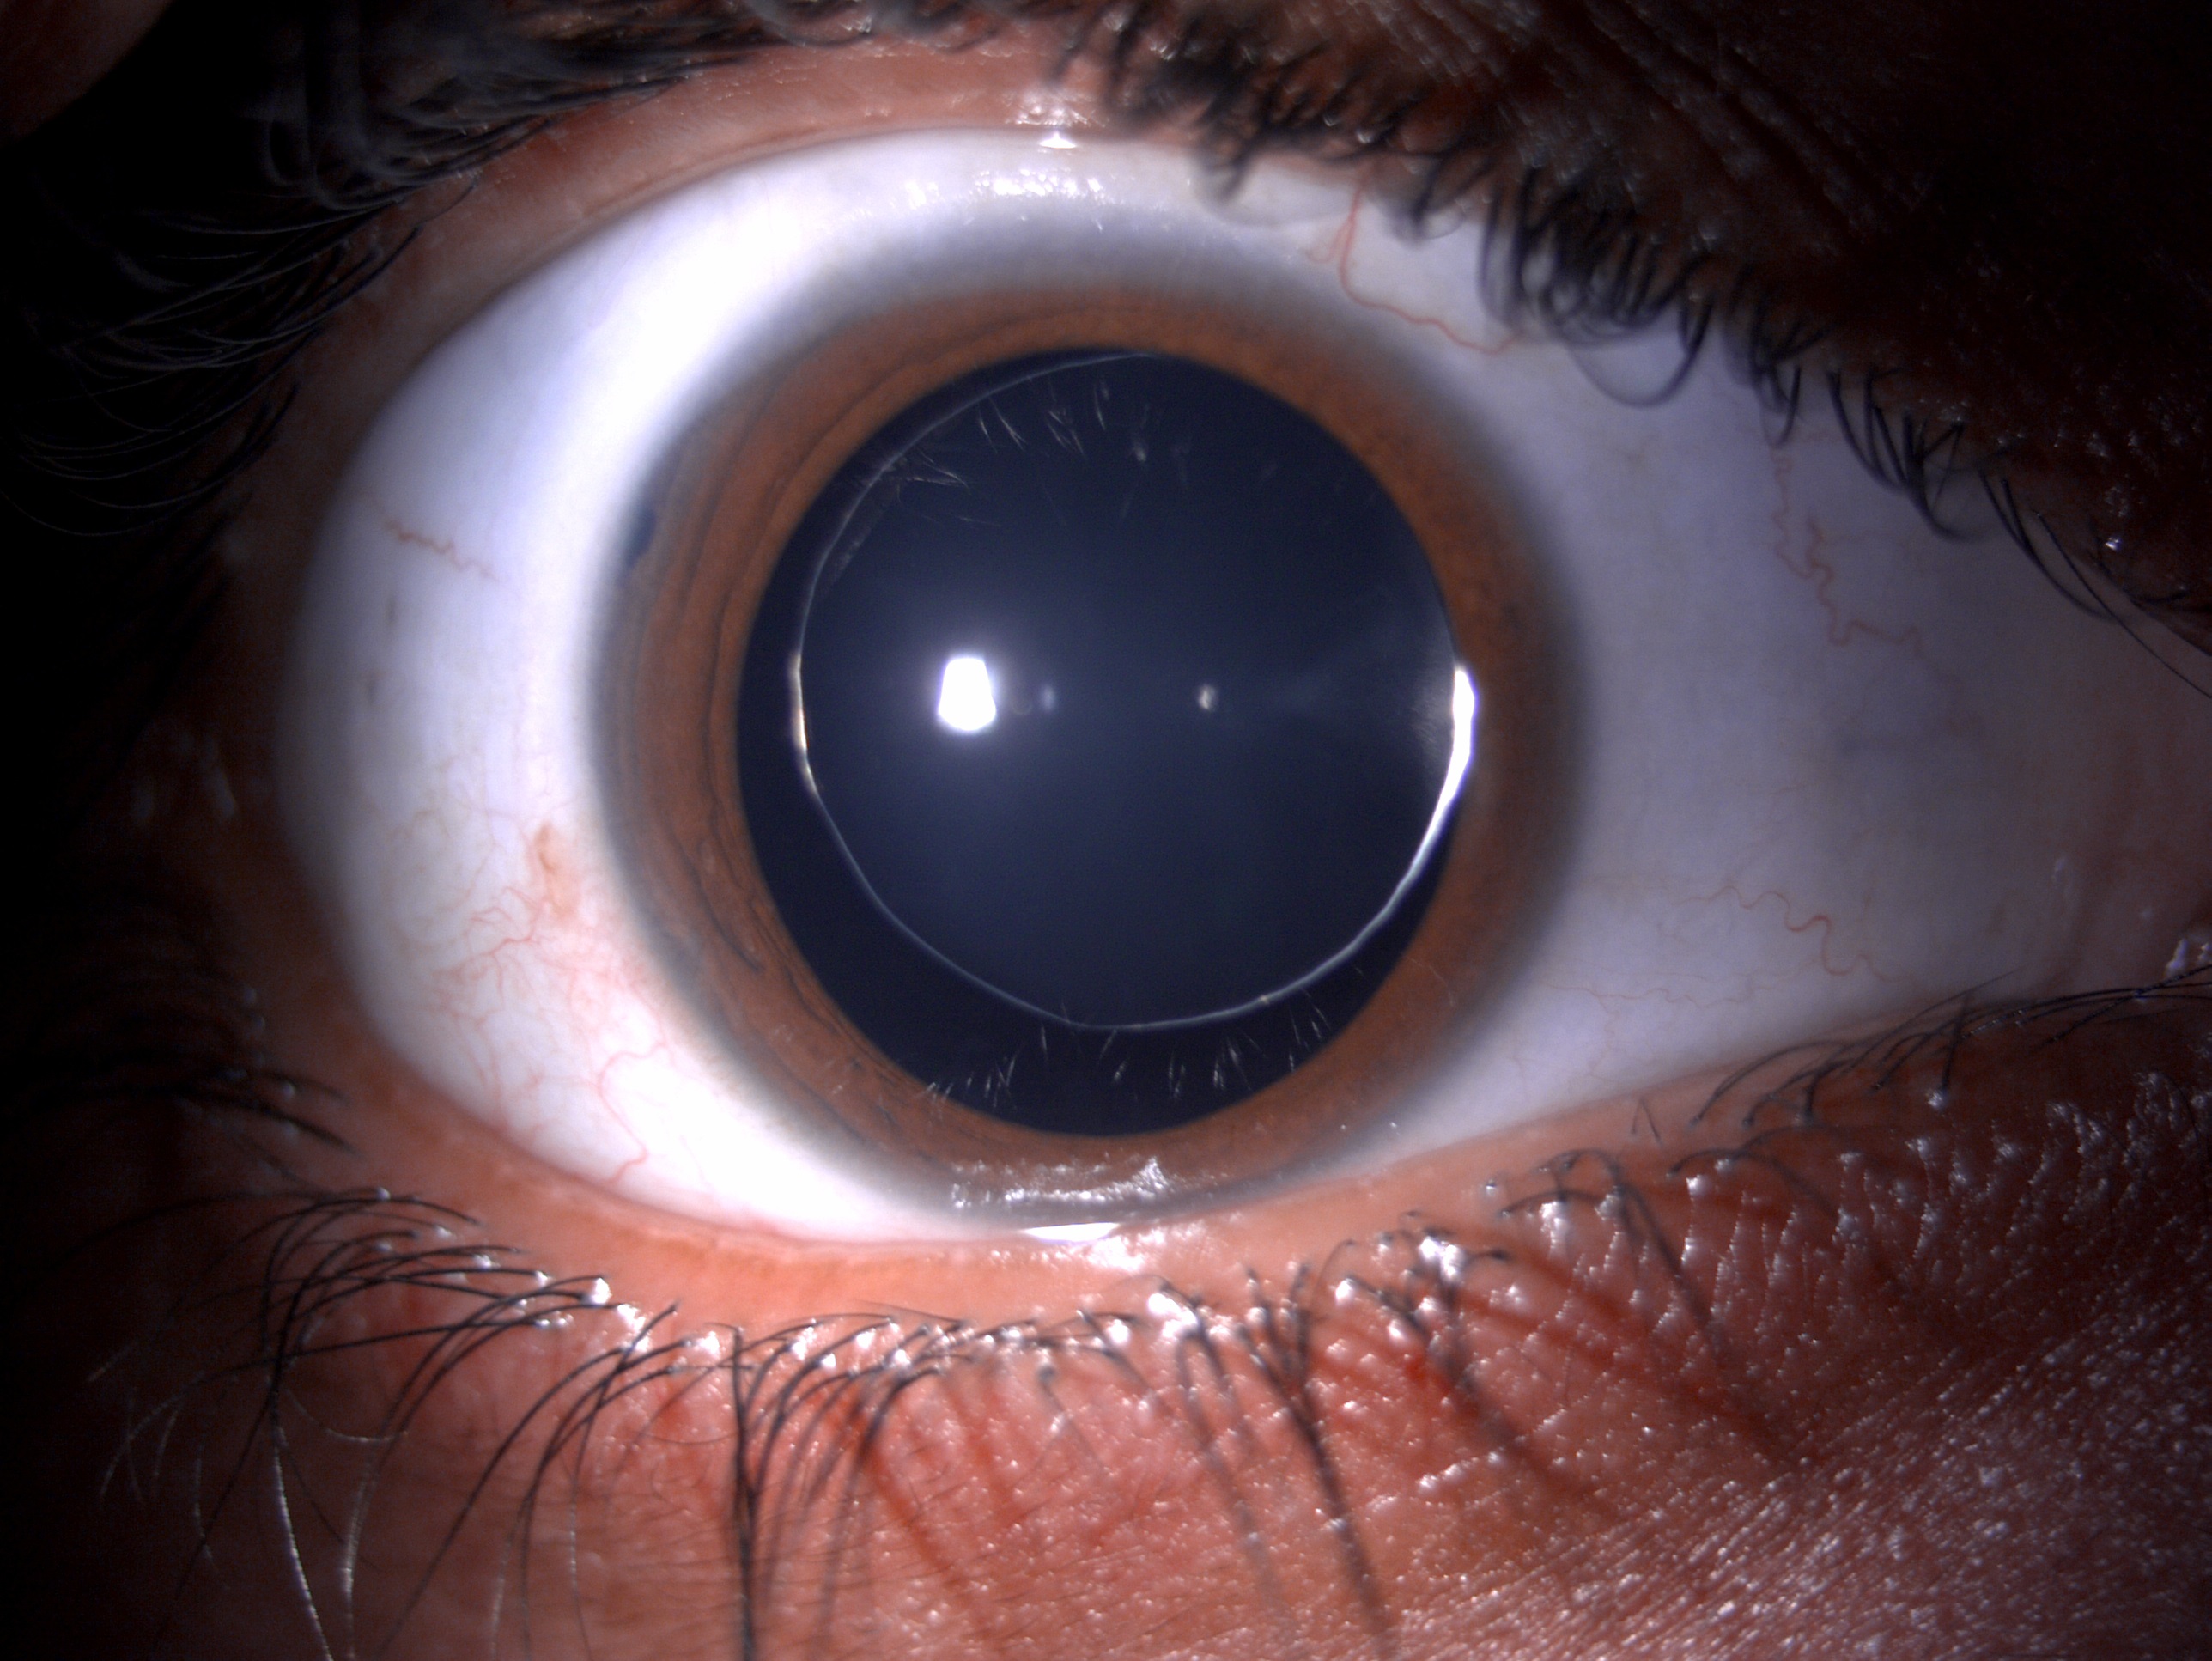 Digital slit lamp image of the patient depicting small microspherophakic clear lens with equator of lens visible under full mydriasis in a patient with Weill-Marchesani syndrome